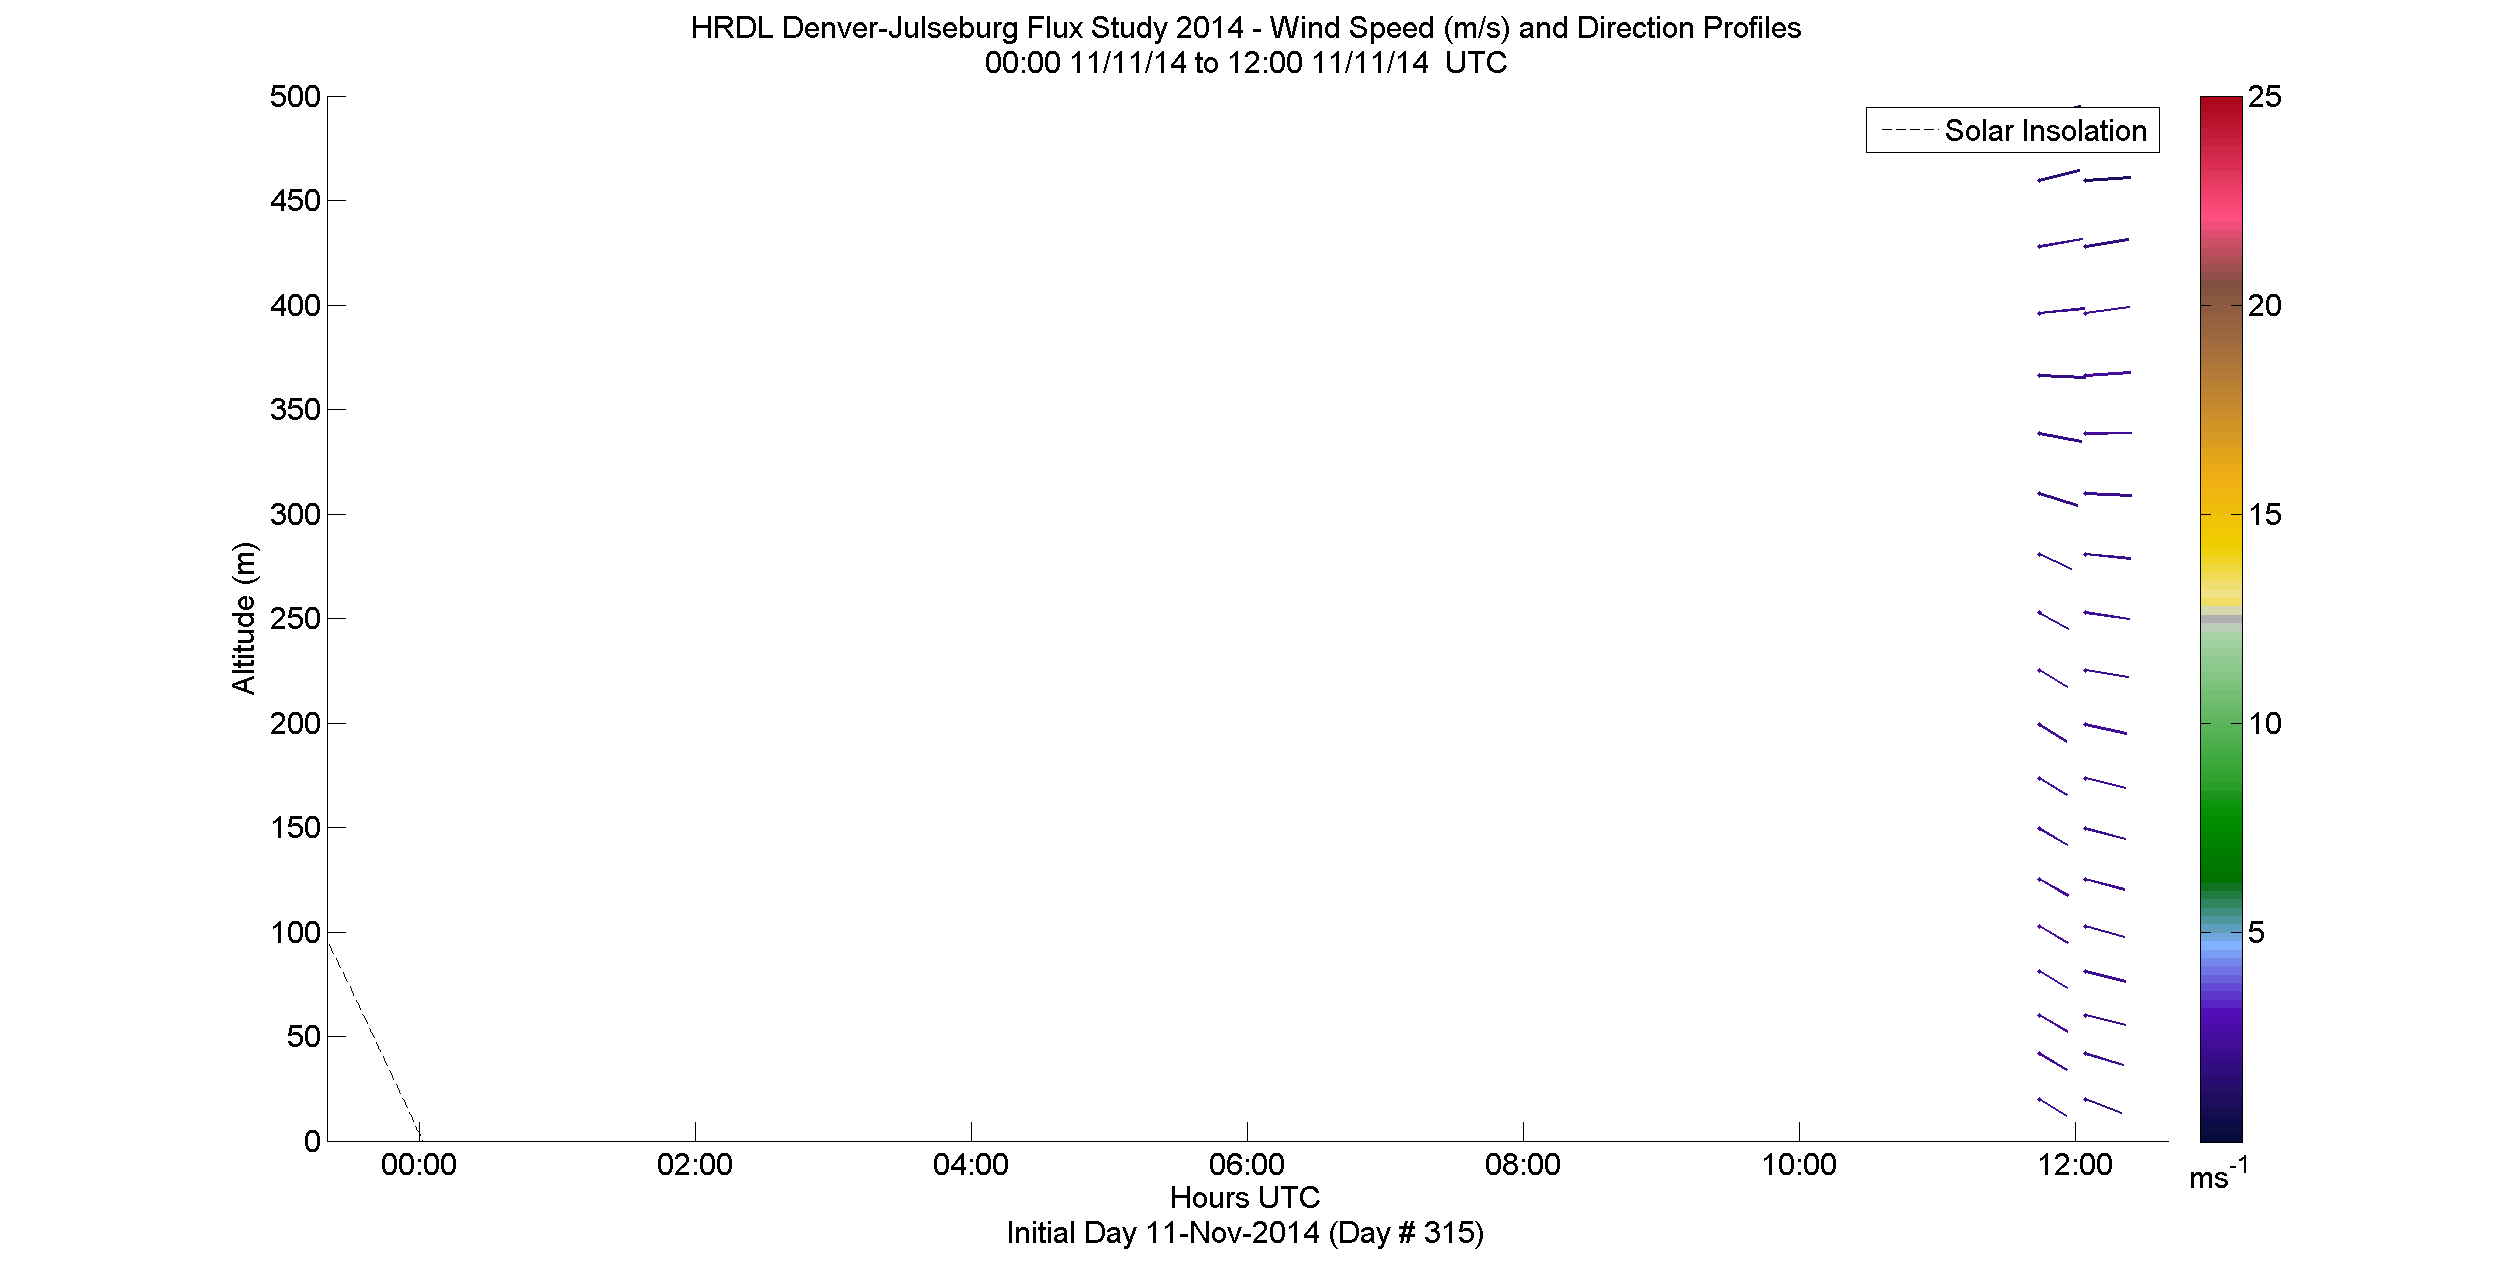 HRDL speed and direction profile - November 11 am